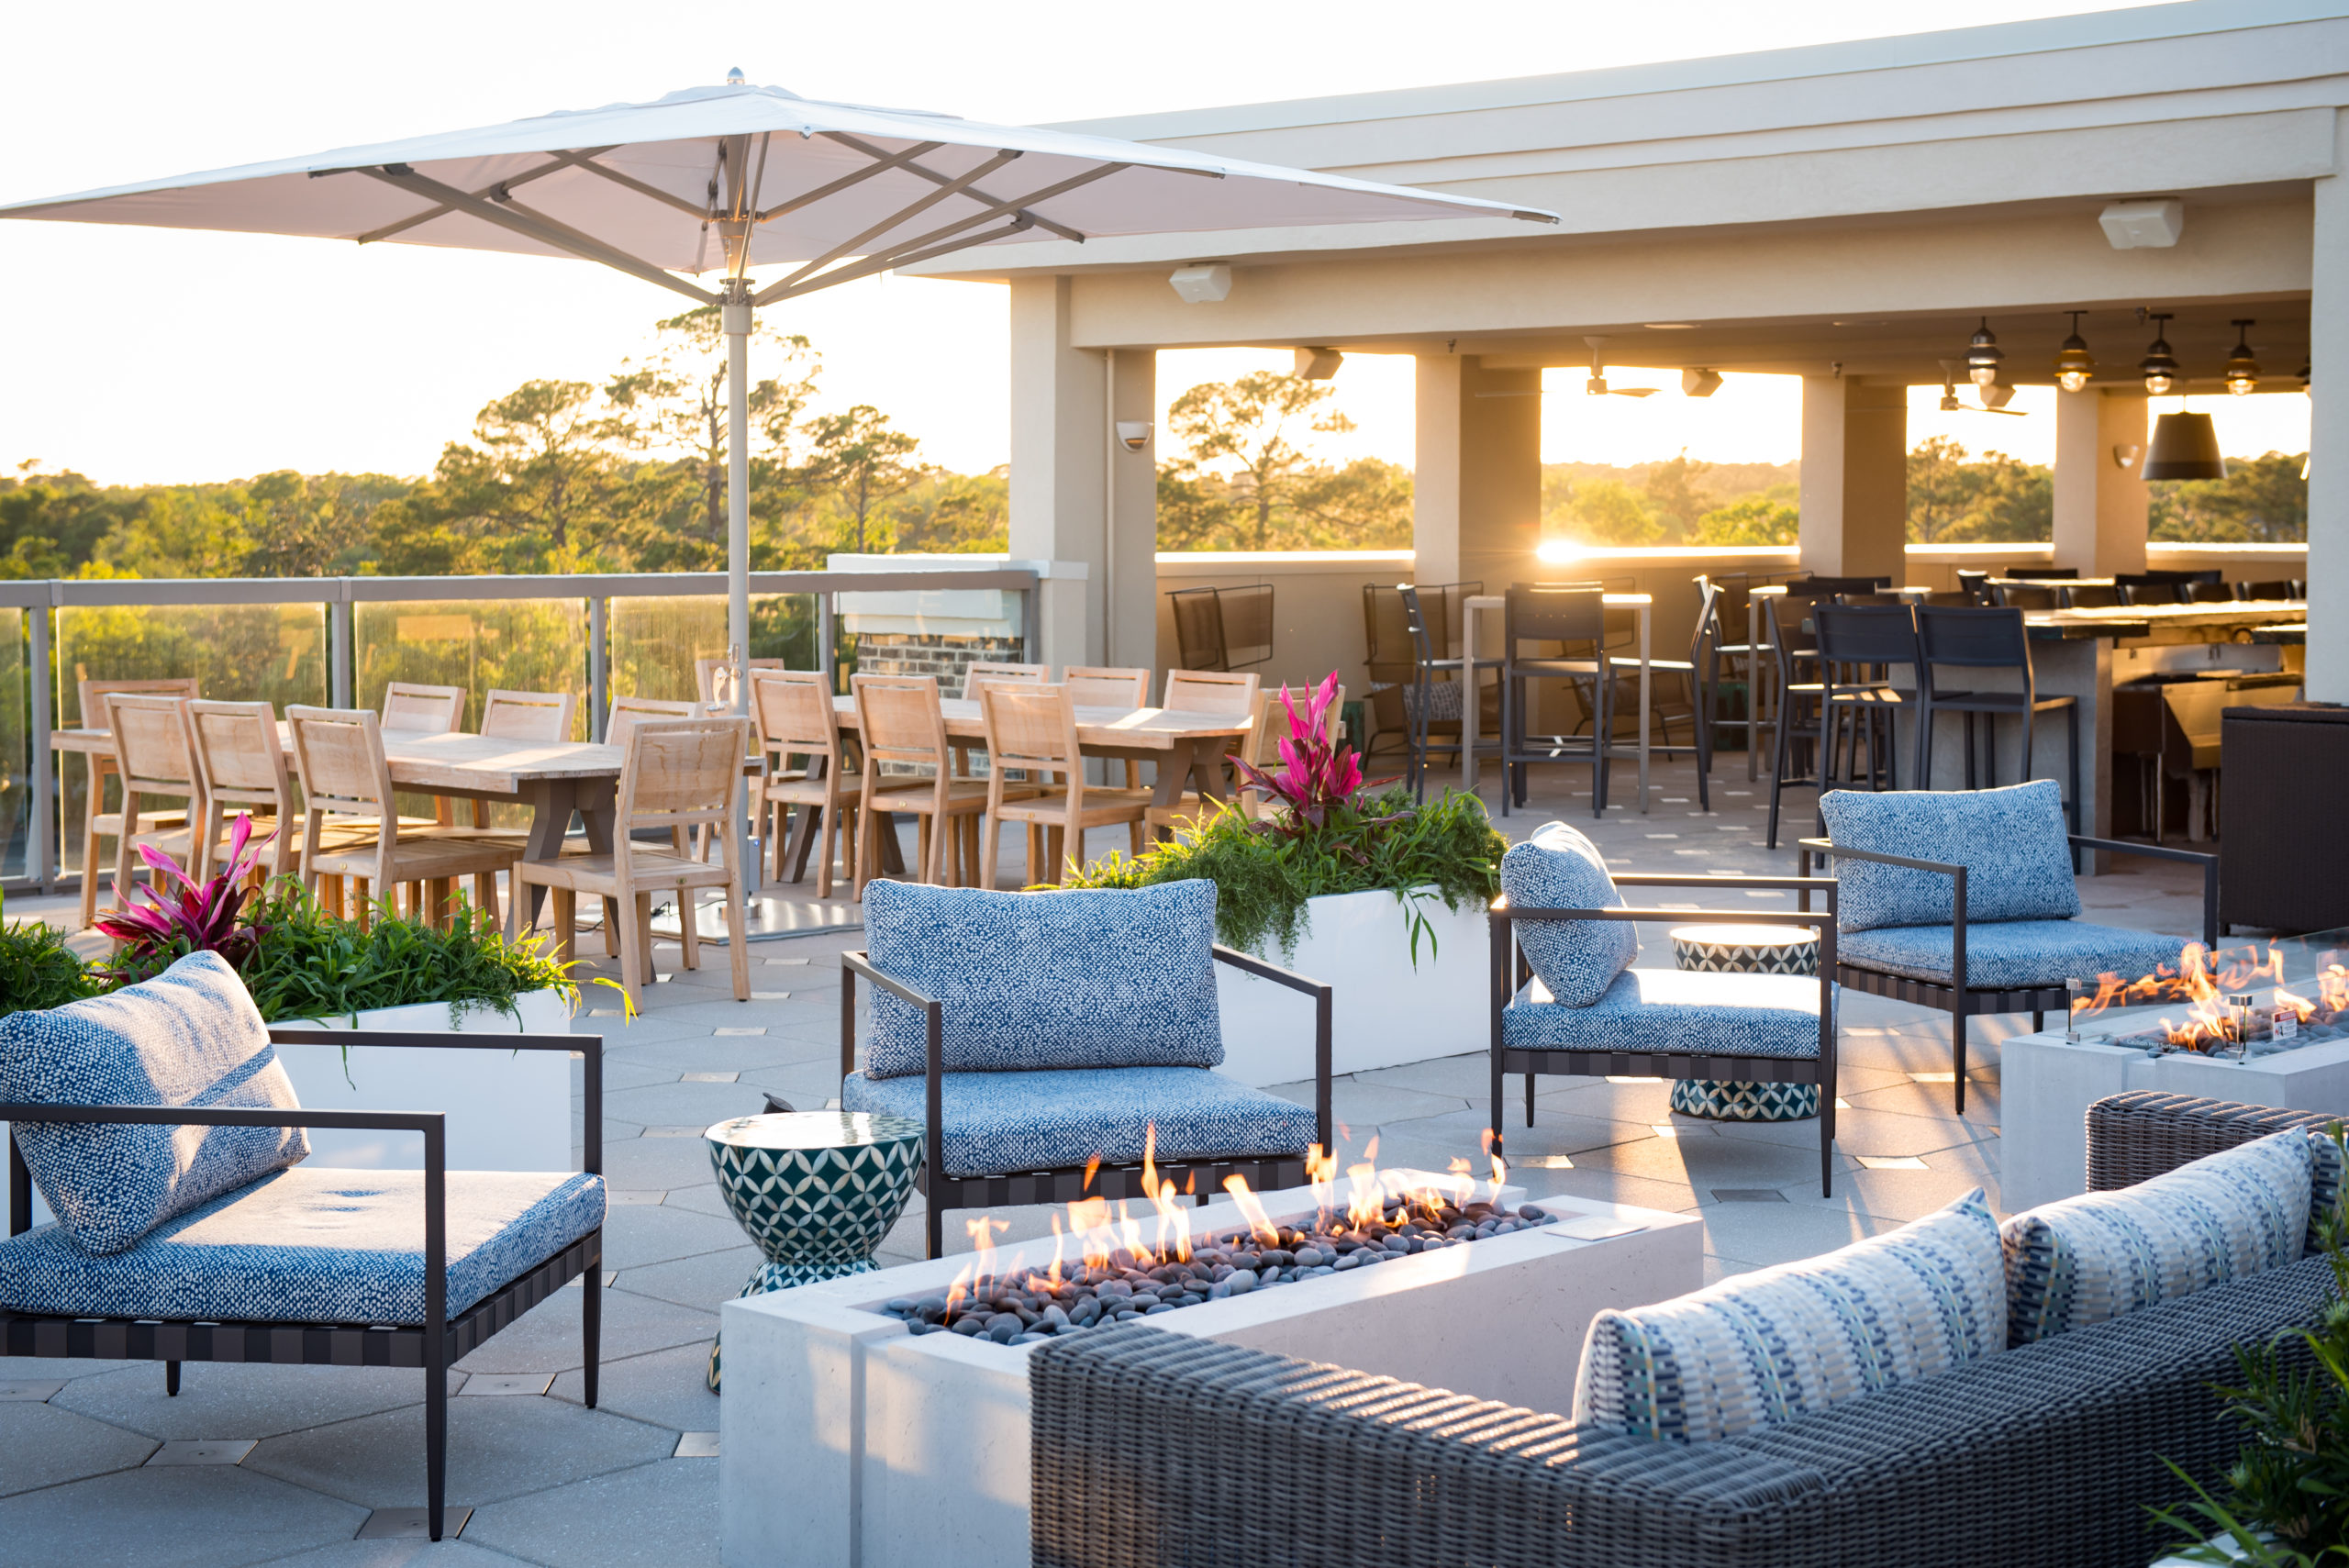 Announcing the opening of High Tide Rooftop Bar at the Courtyard by Marriott Hilton Head Island